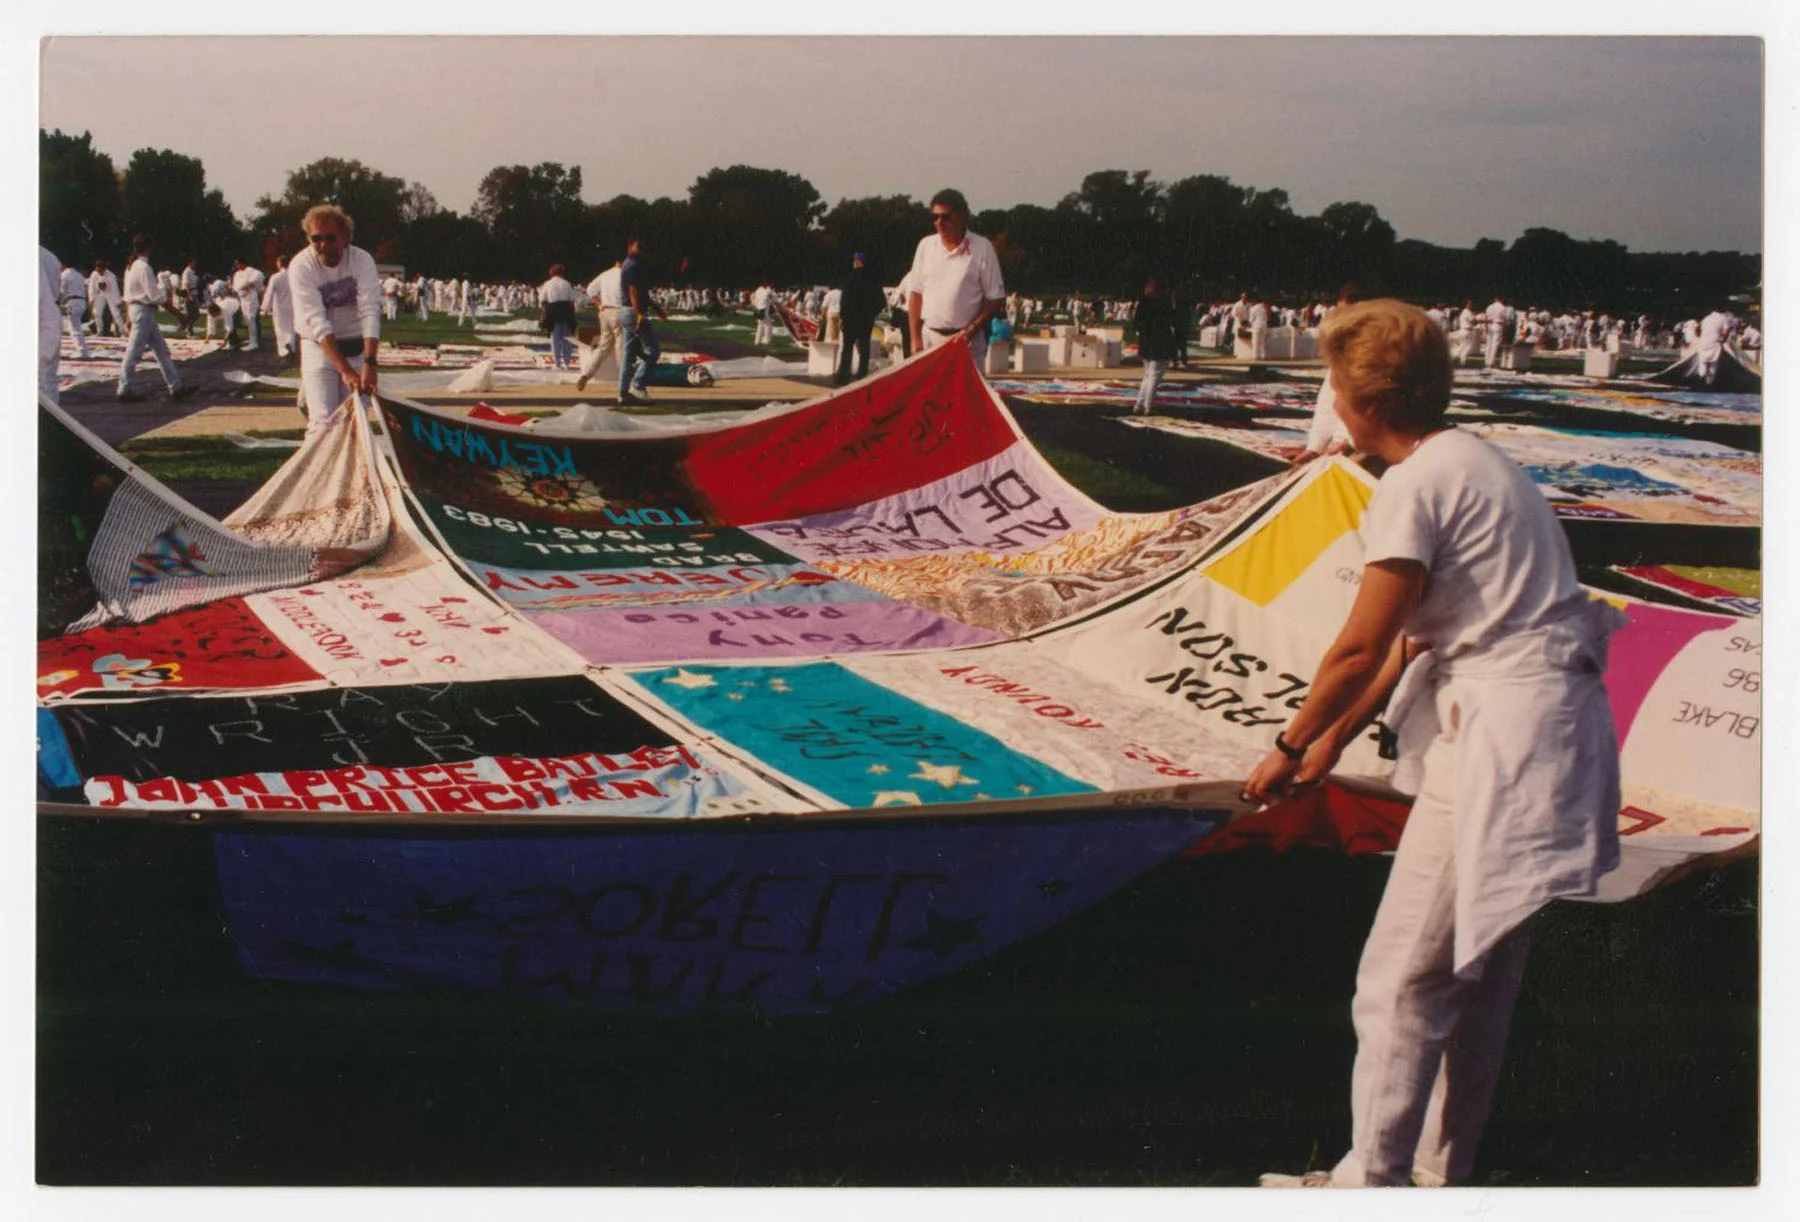 A color photograph of colorful hand-sewn quilts being laid down on the grass by three figures in the foreground. All wear white. 